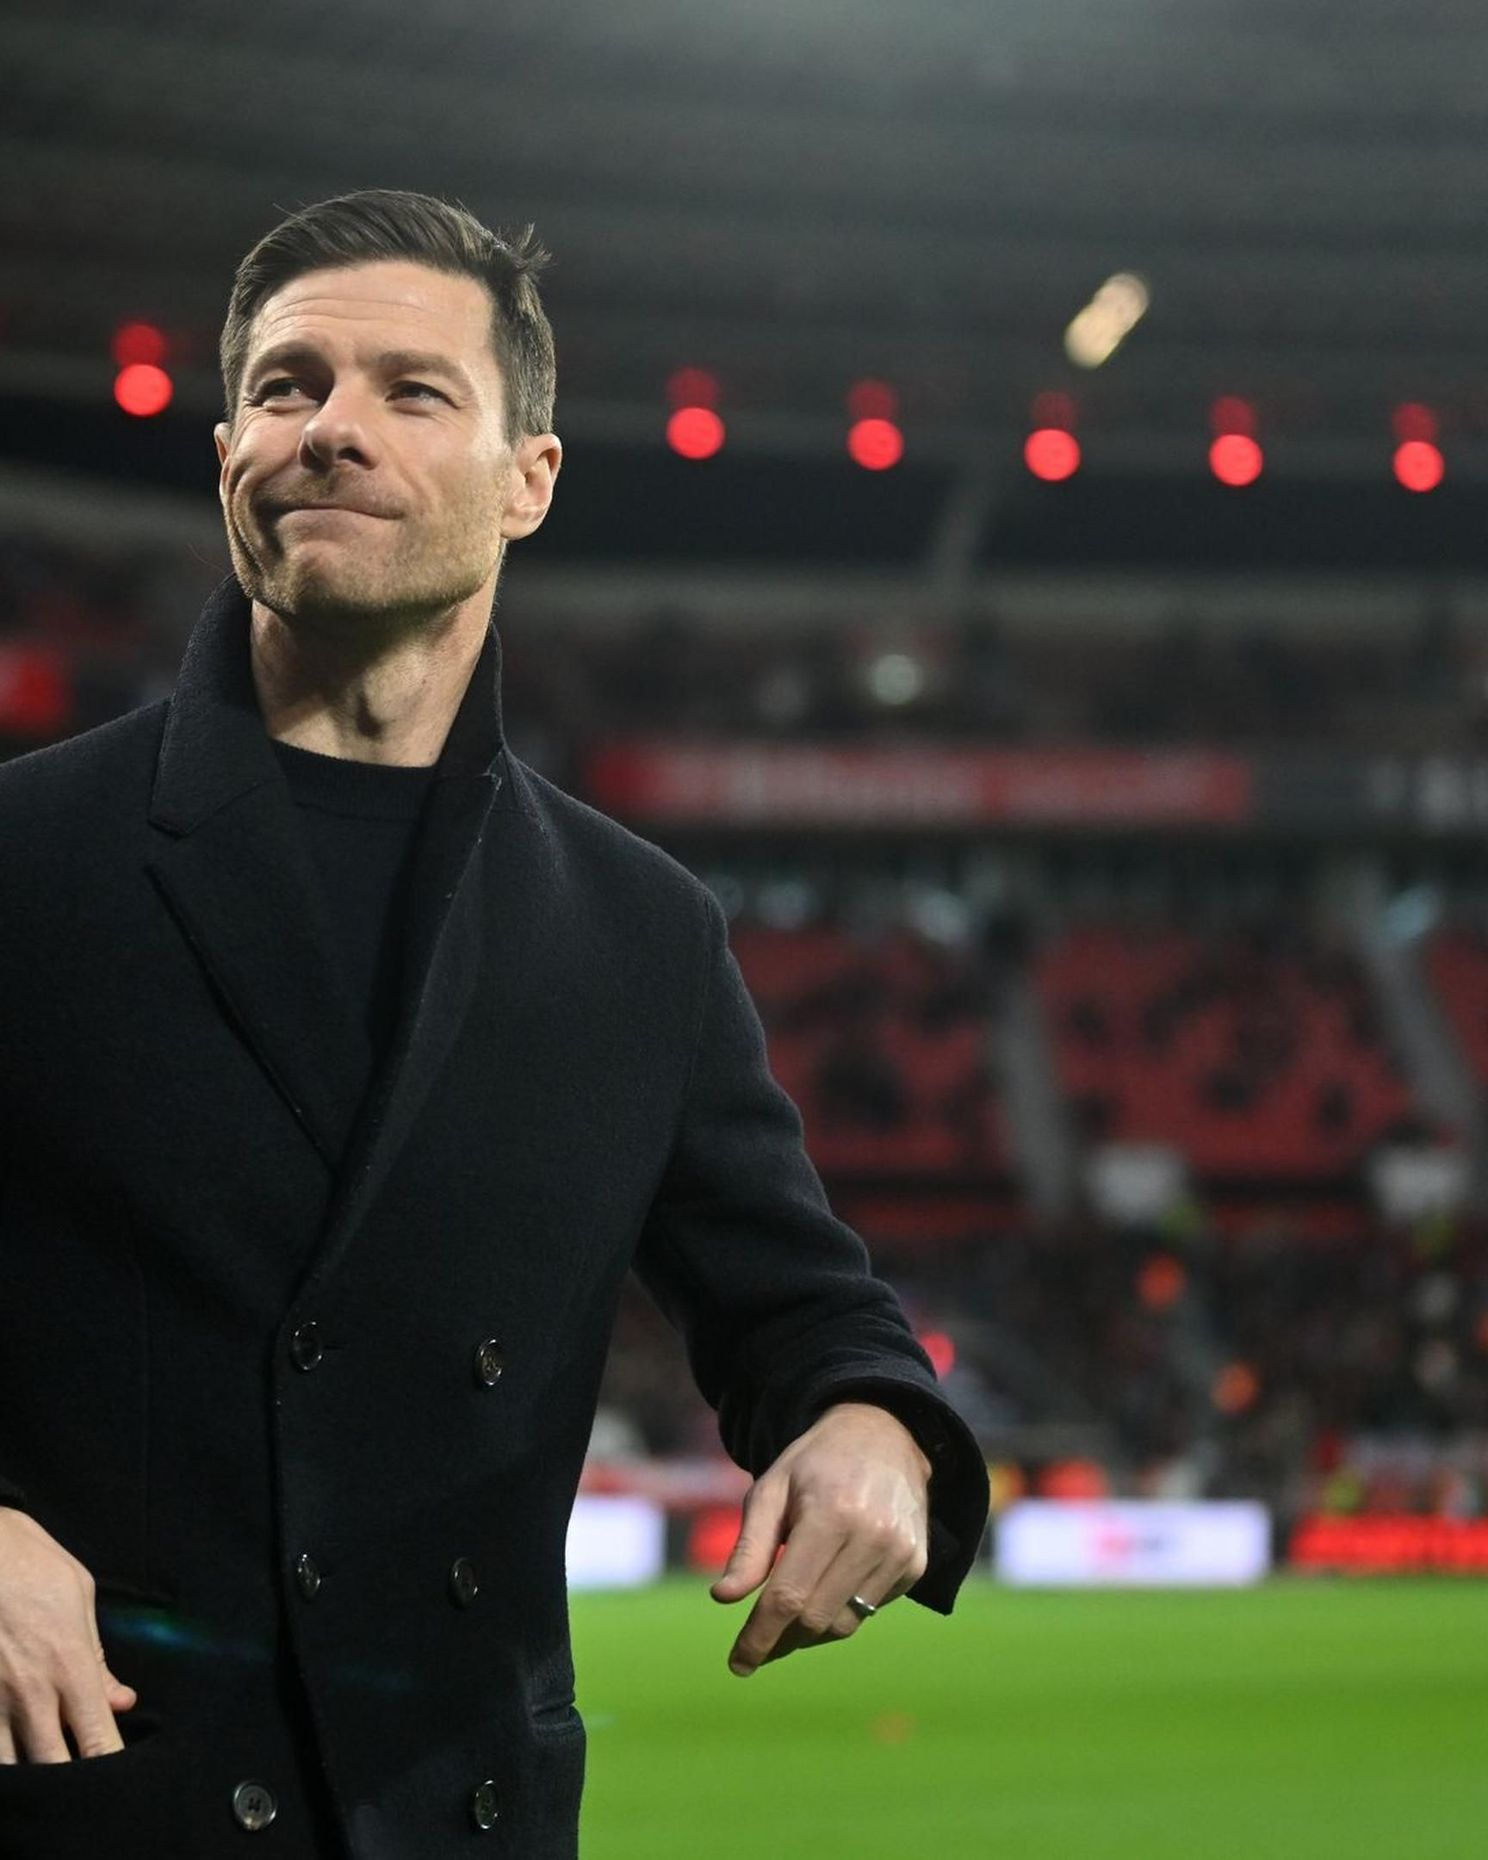 Liverpool are now in direct contact with Leverkusen to find an agreement for Xabi Alonso’s arrival